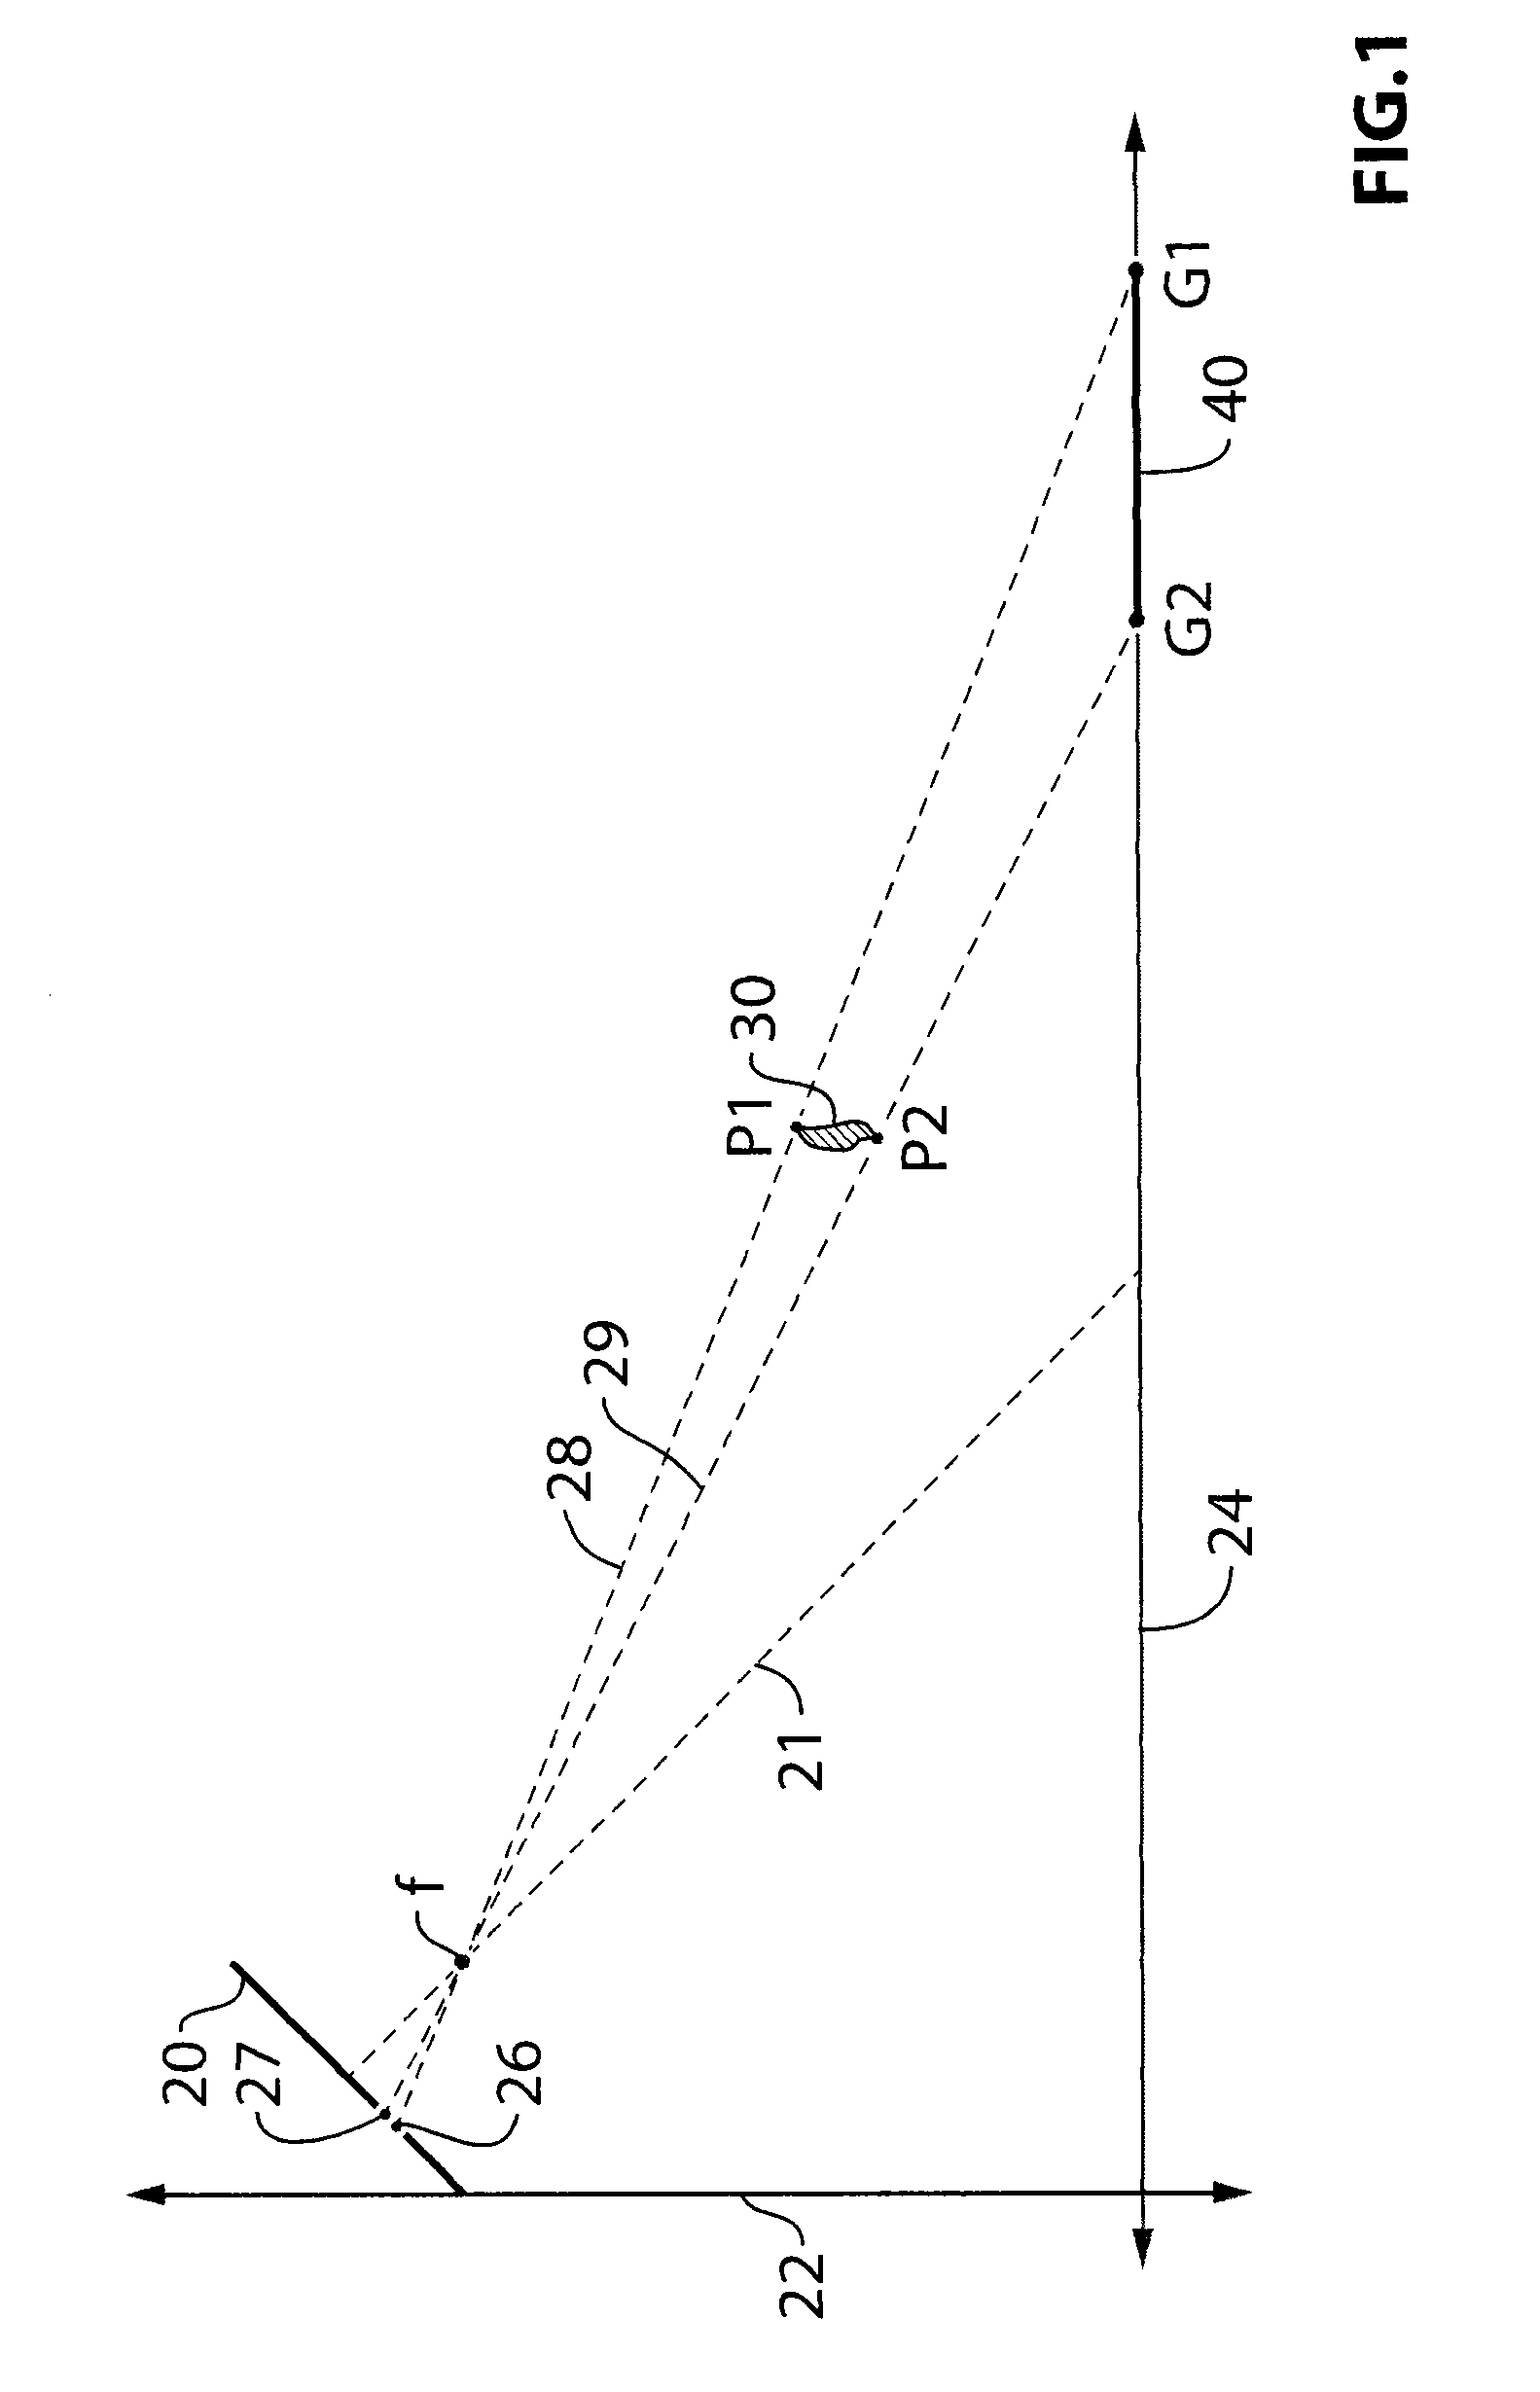 Image processing method for detecting objects using relative motion